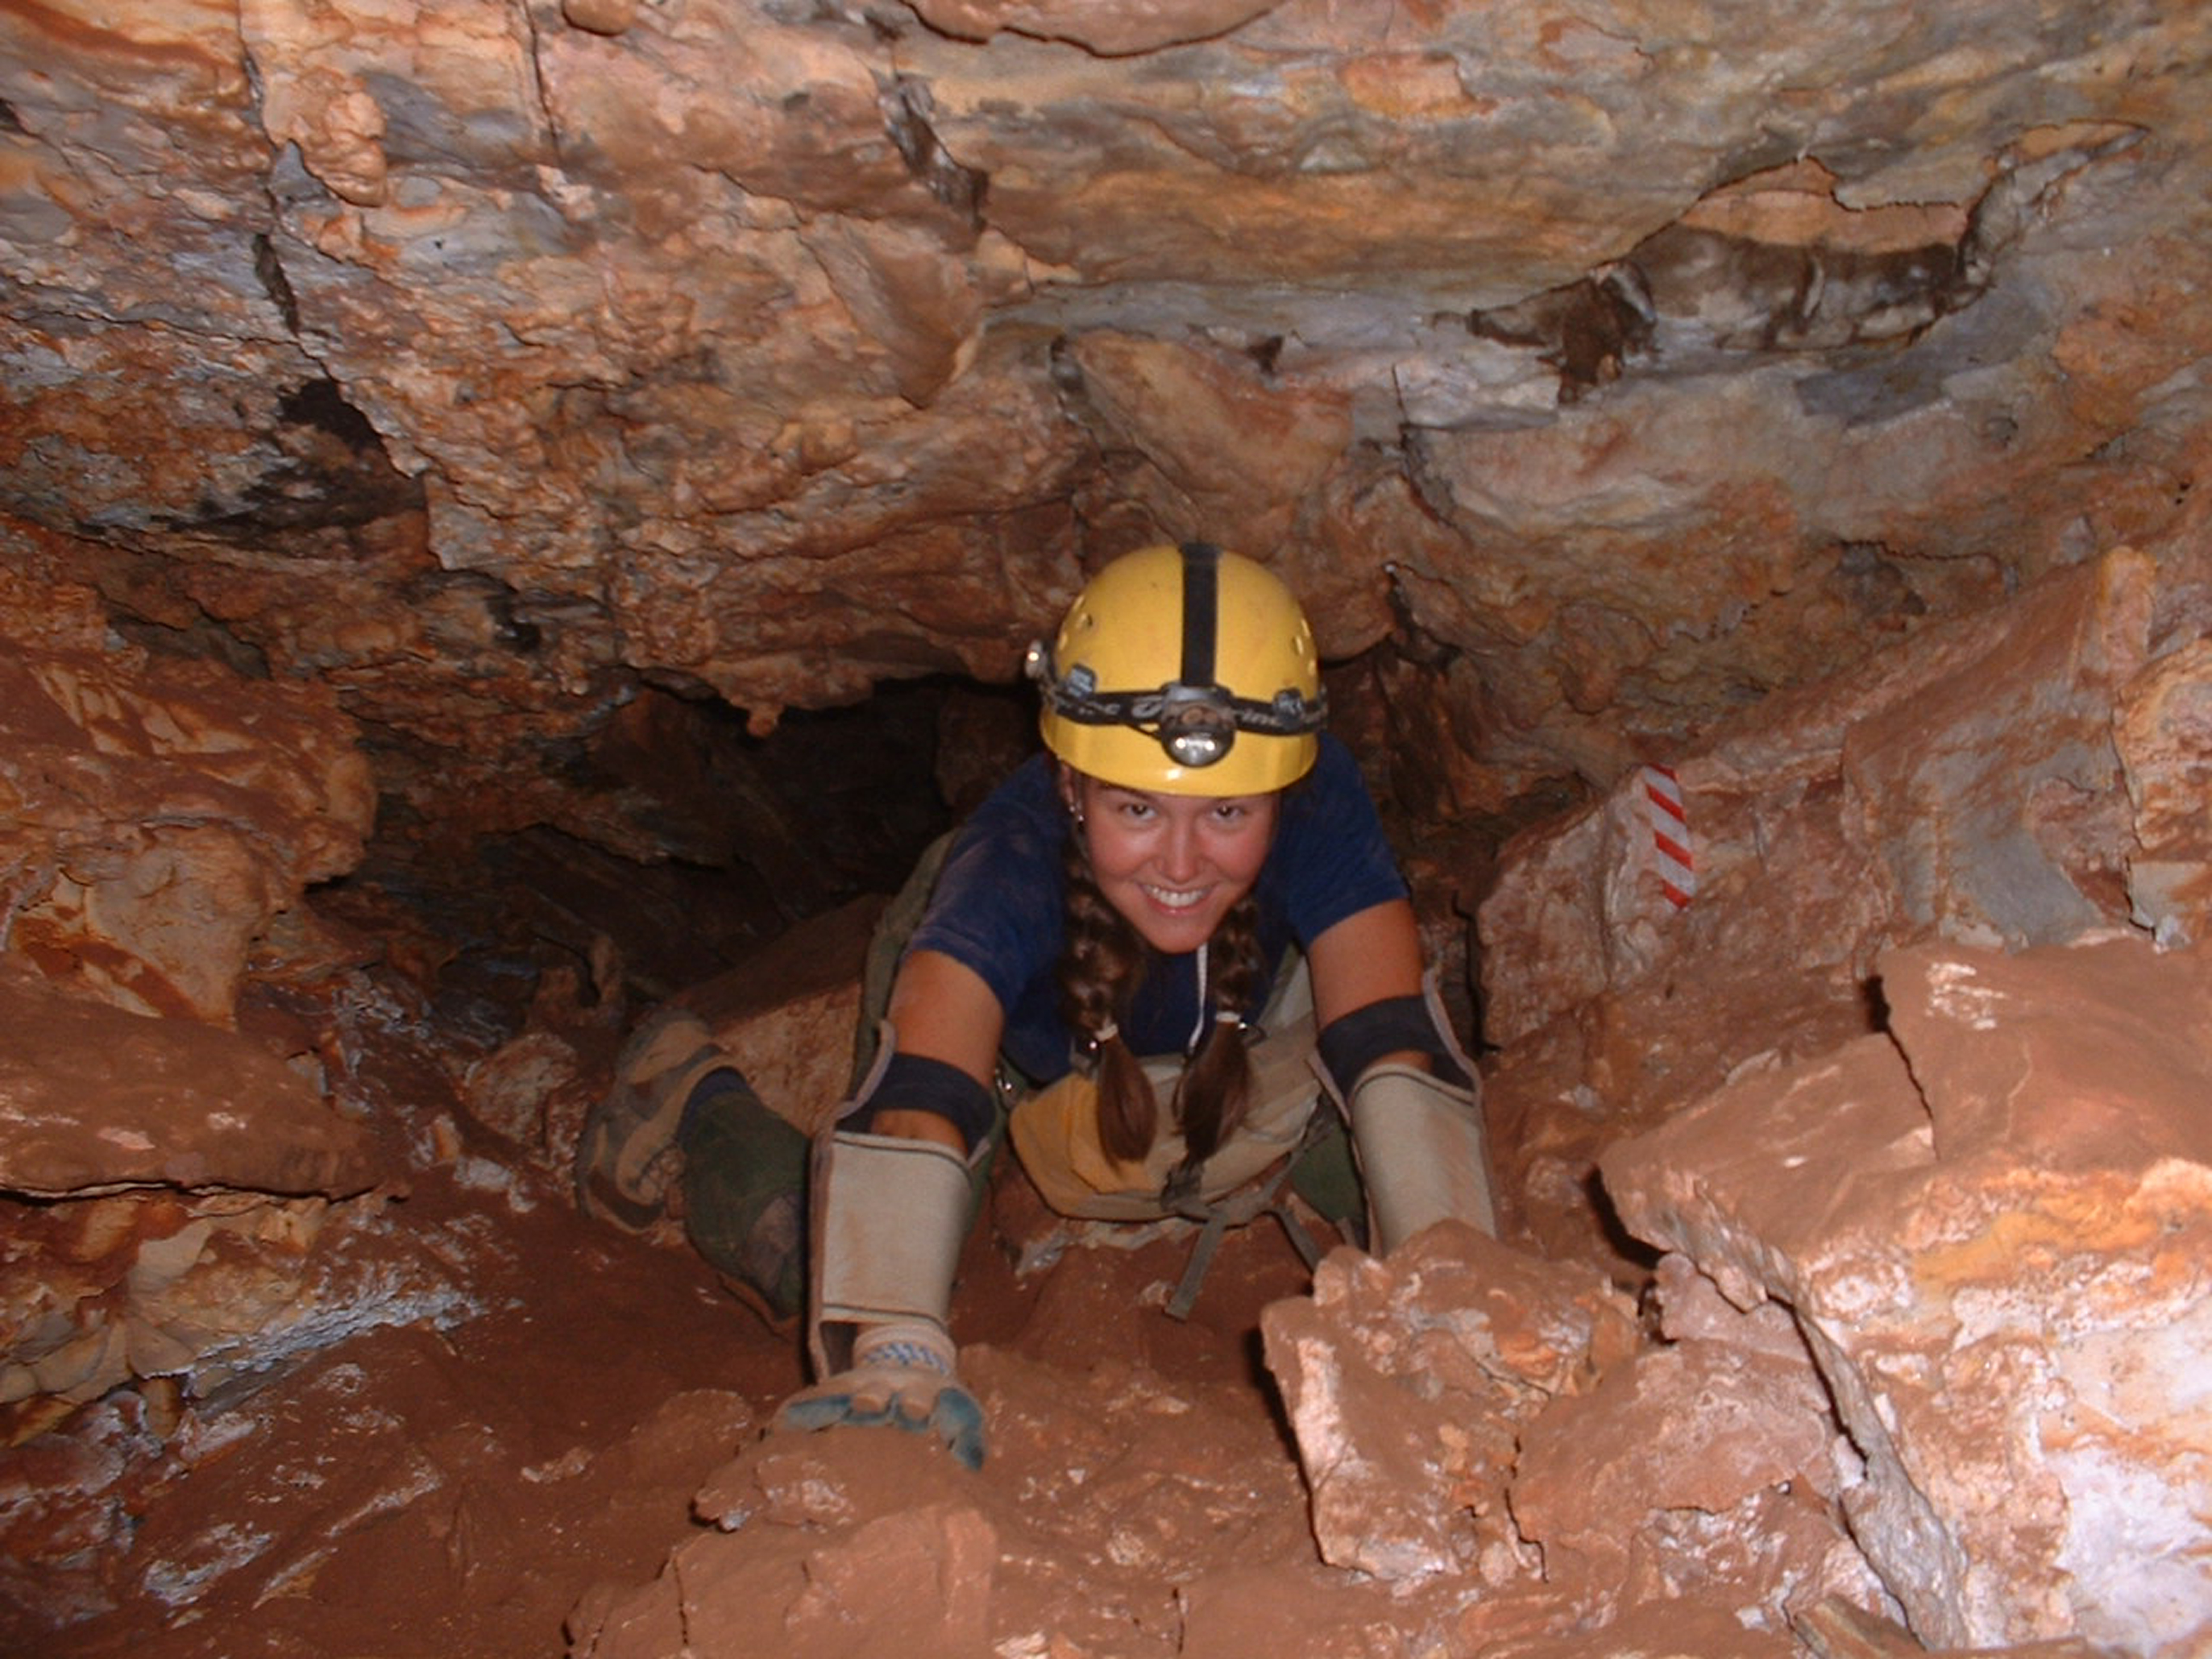 a caver with pads and helmet crawling in the cave